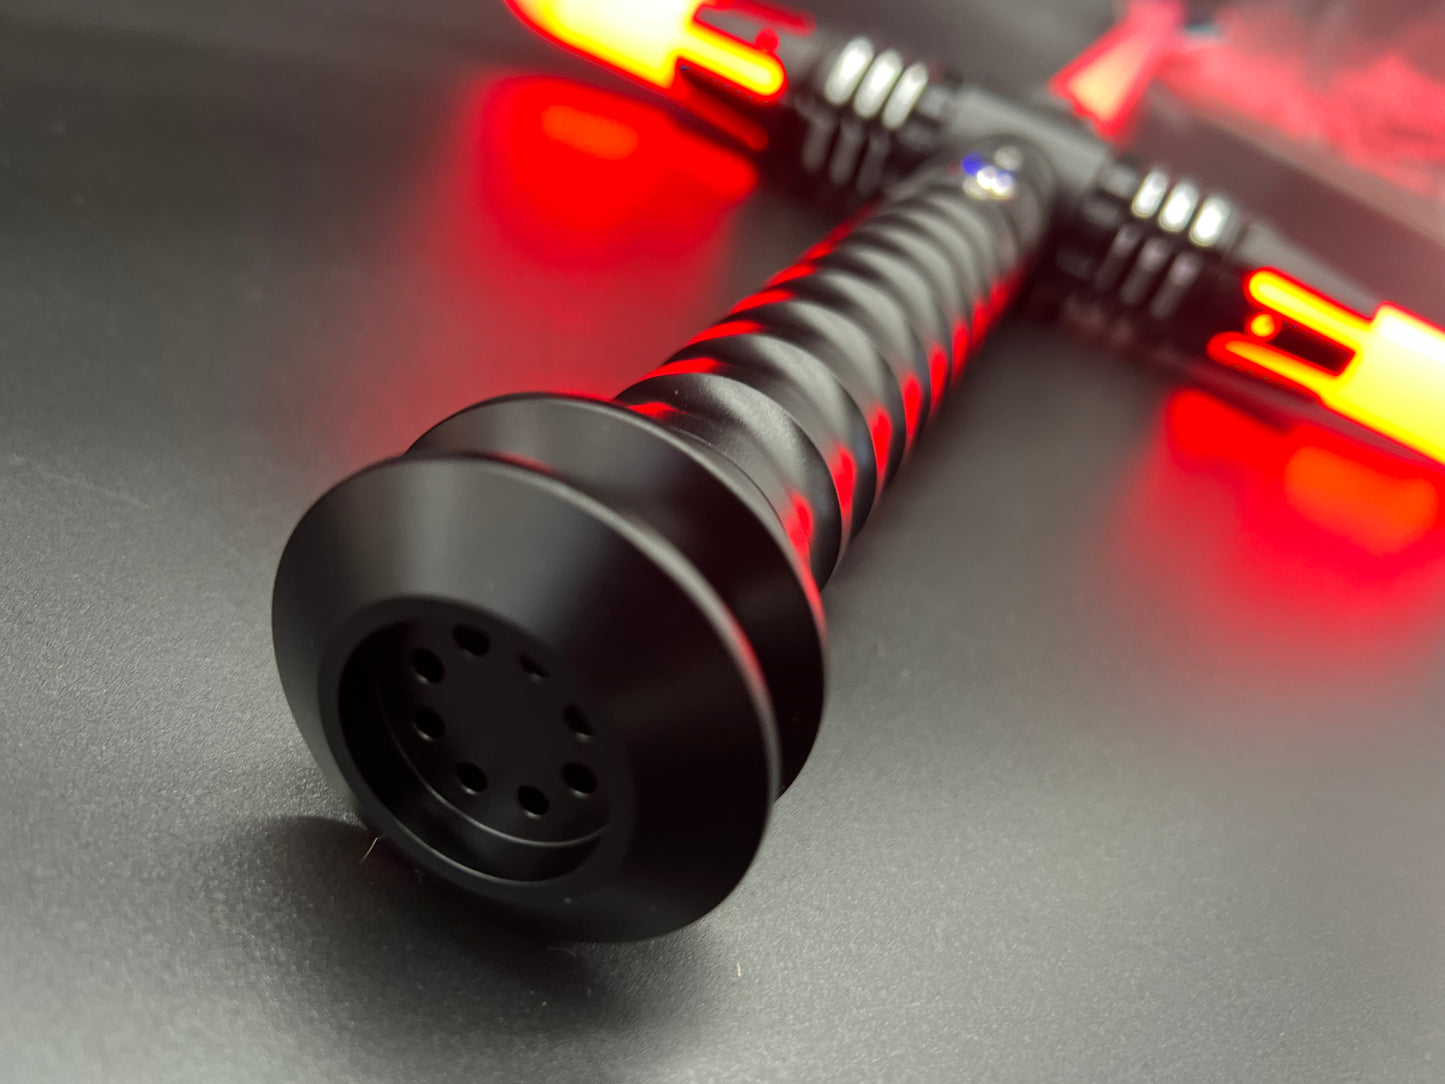 THE SITH CROSSBLADE LIGHTSABER